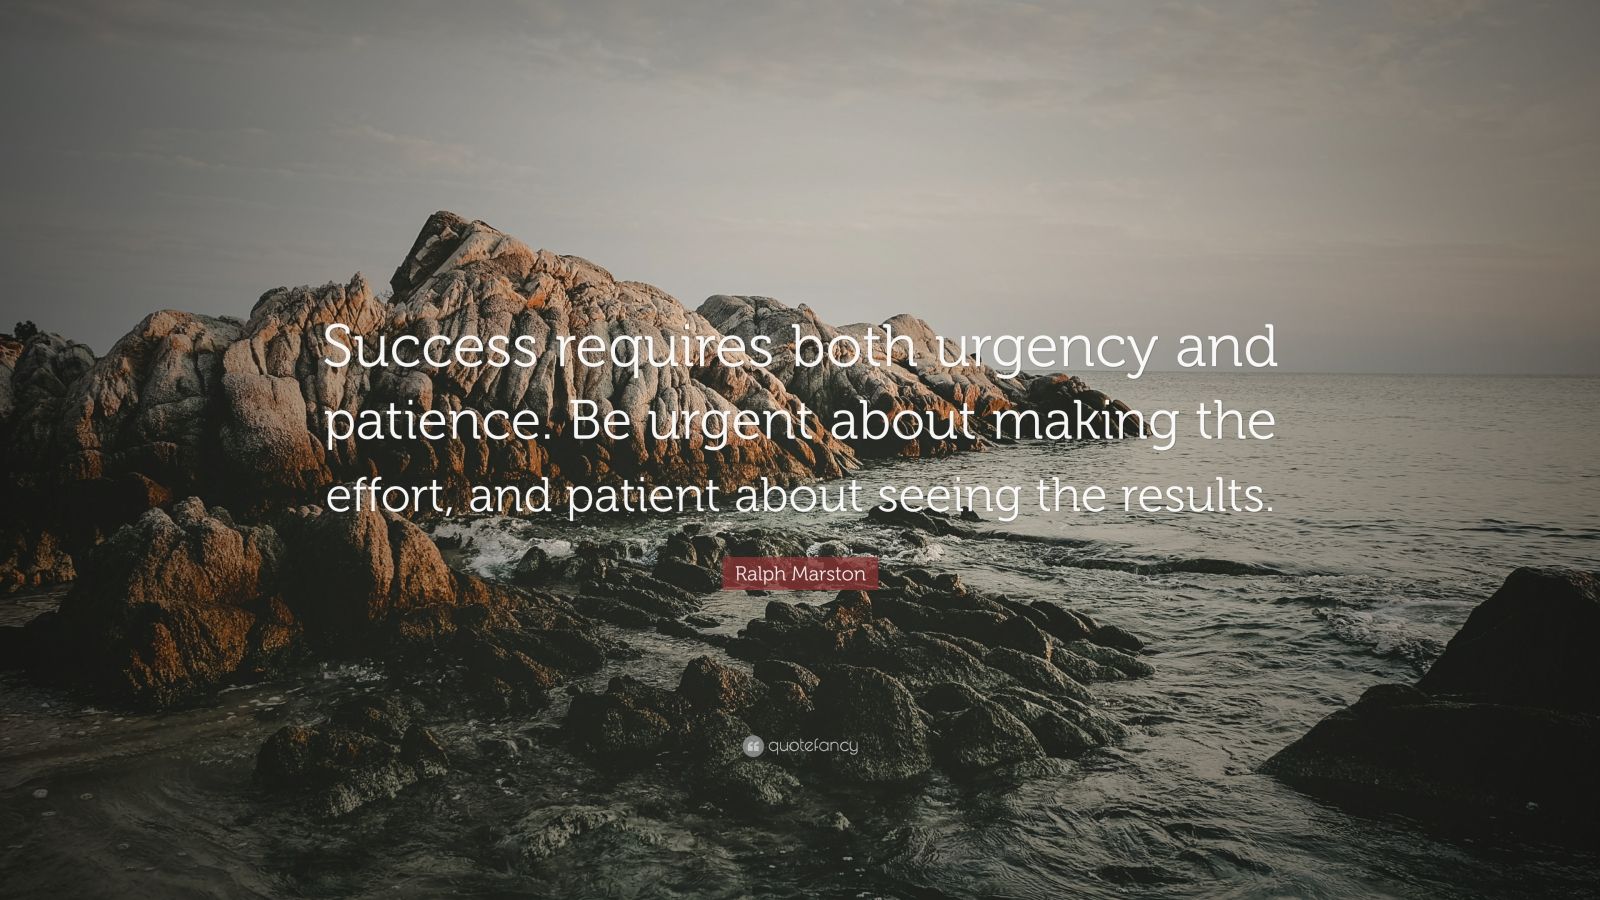 Ralph Marston Quote: “Success requires both urgency and patience. Be